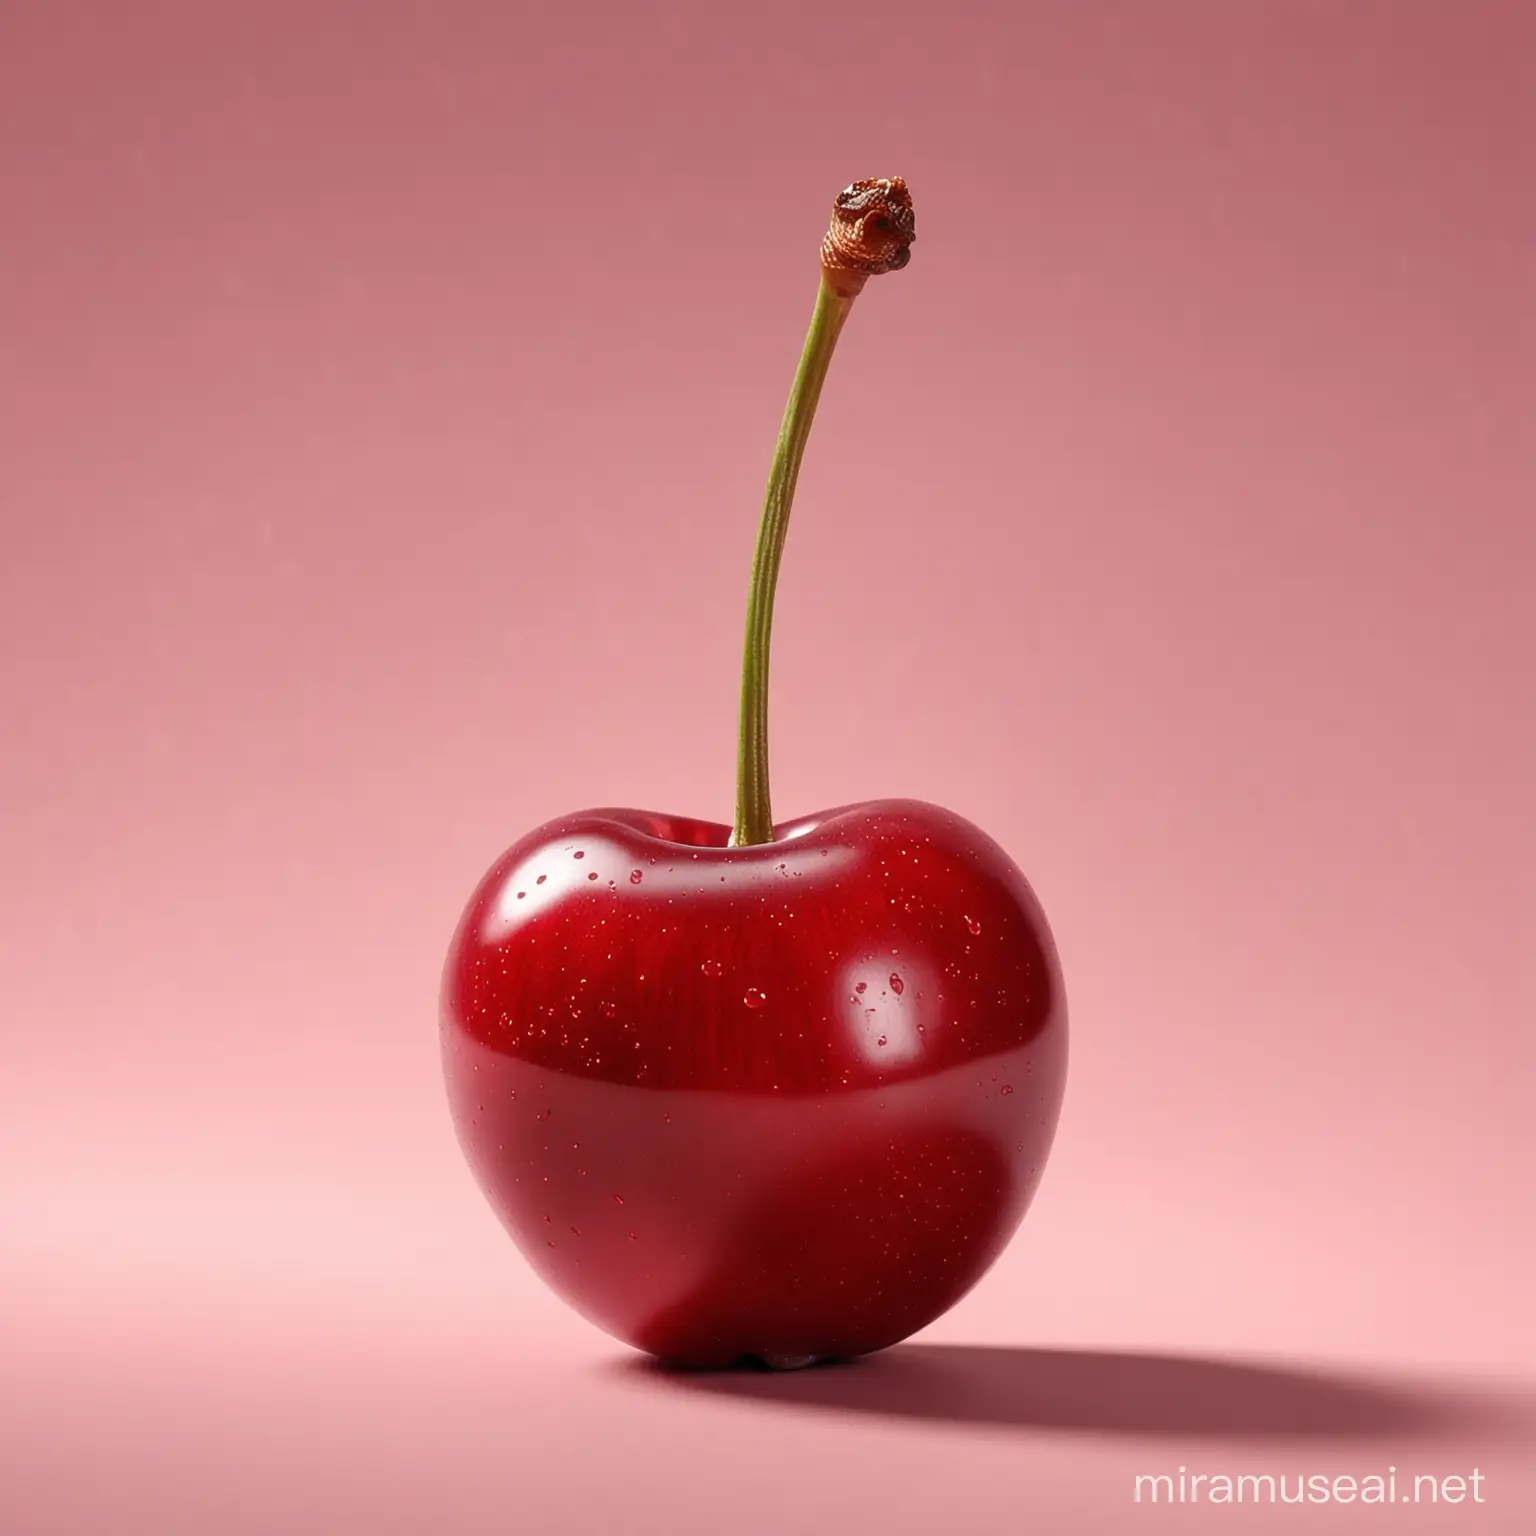 Vibrant Photorealistic Cherry on Colorful Background